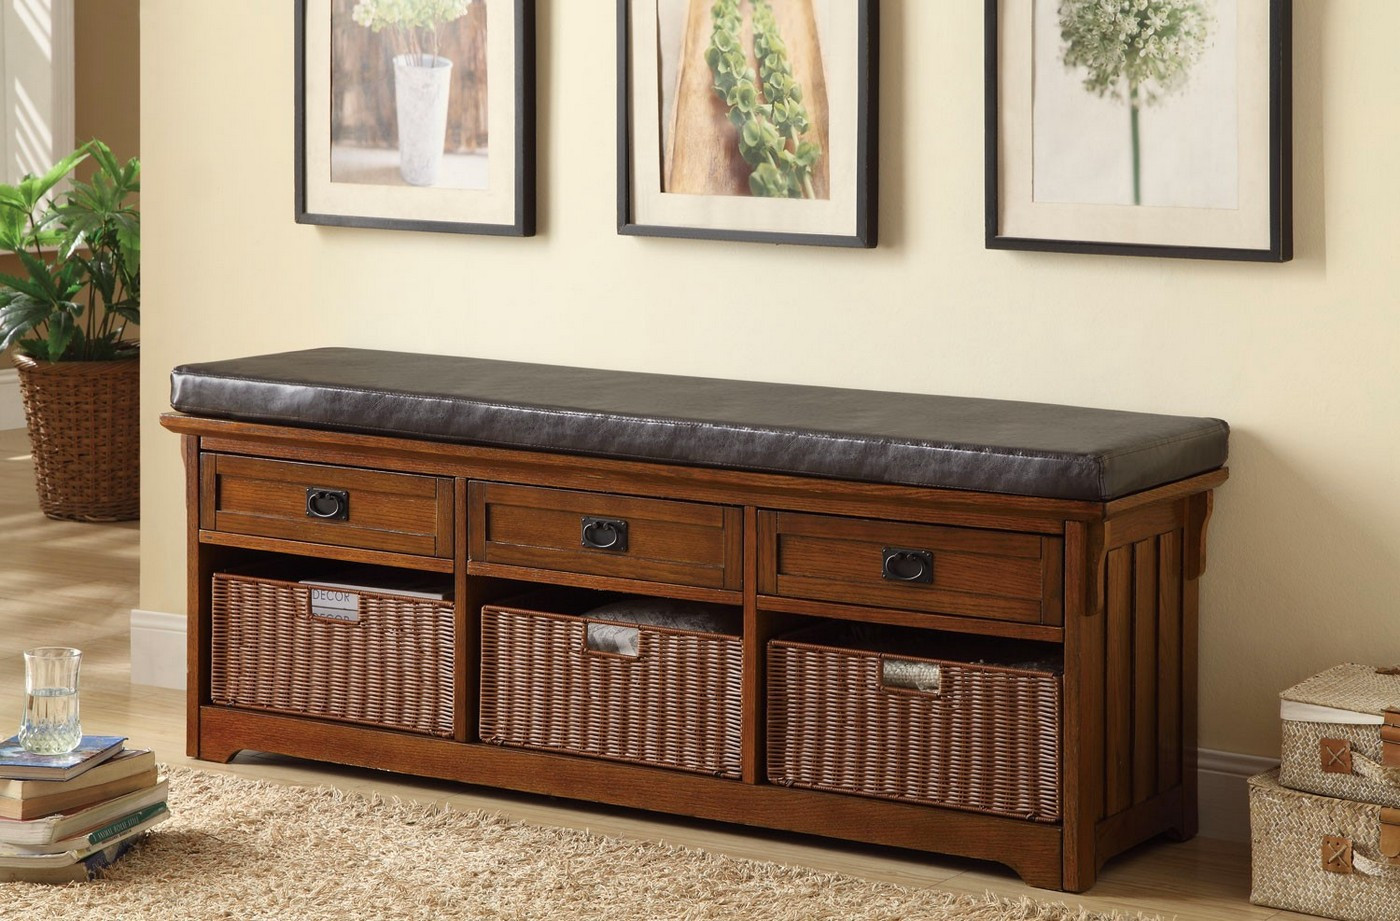 Storage Bench With Cushion
 Dark Brown Upholstered Oak Bench With Basket Drawers